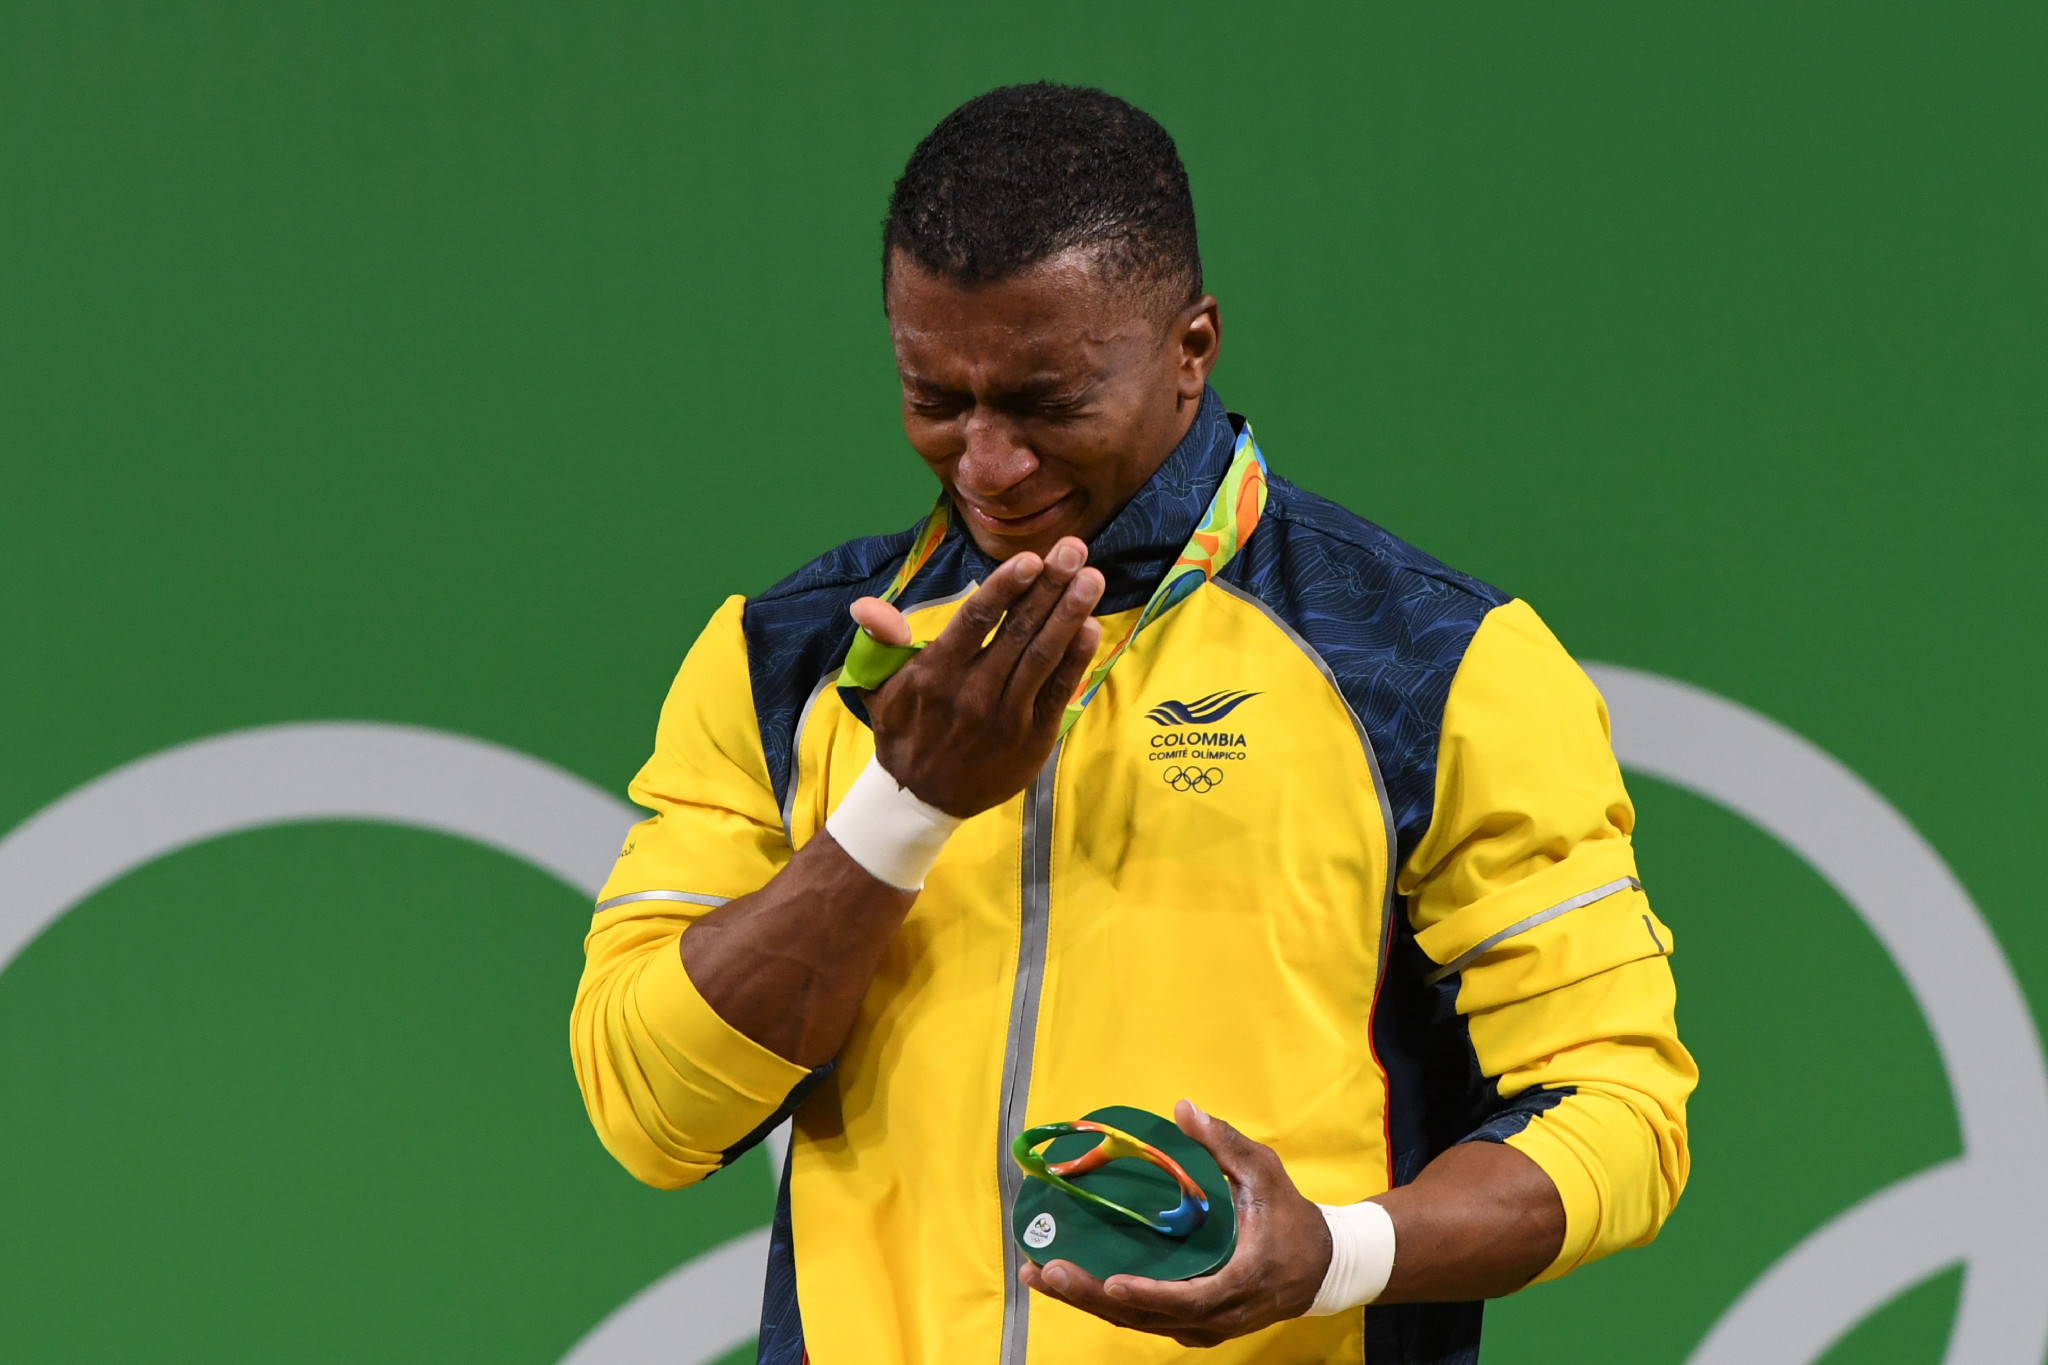 Oscar Figueroa's emotions got the better of him at Rio 2016 ©Getty Images